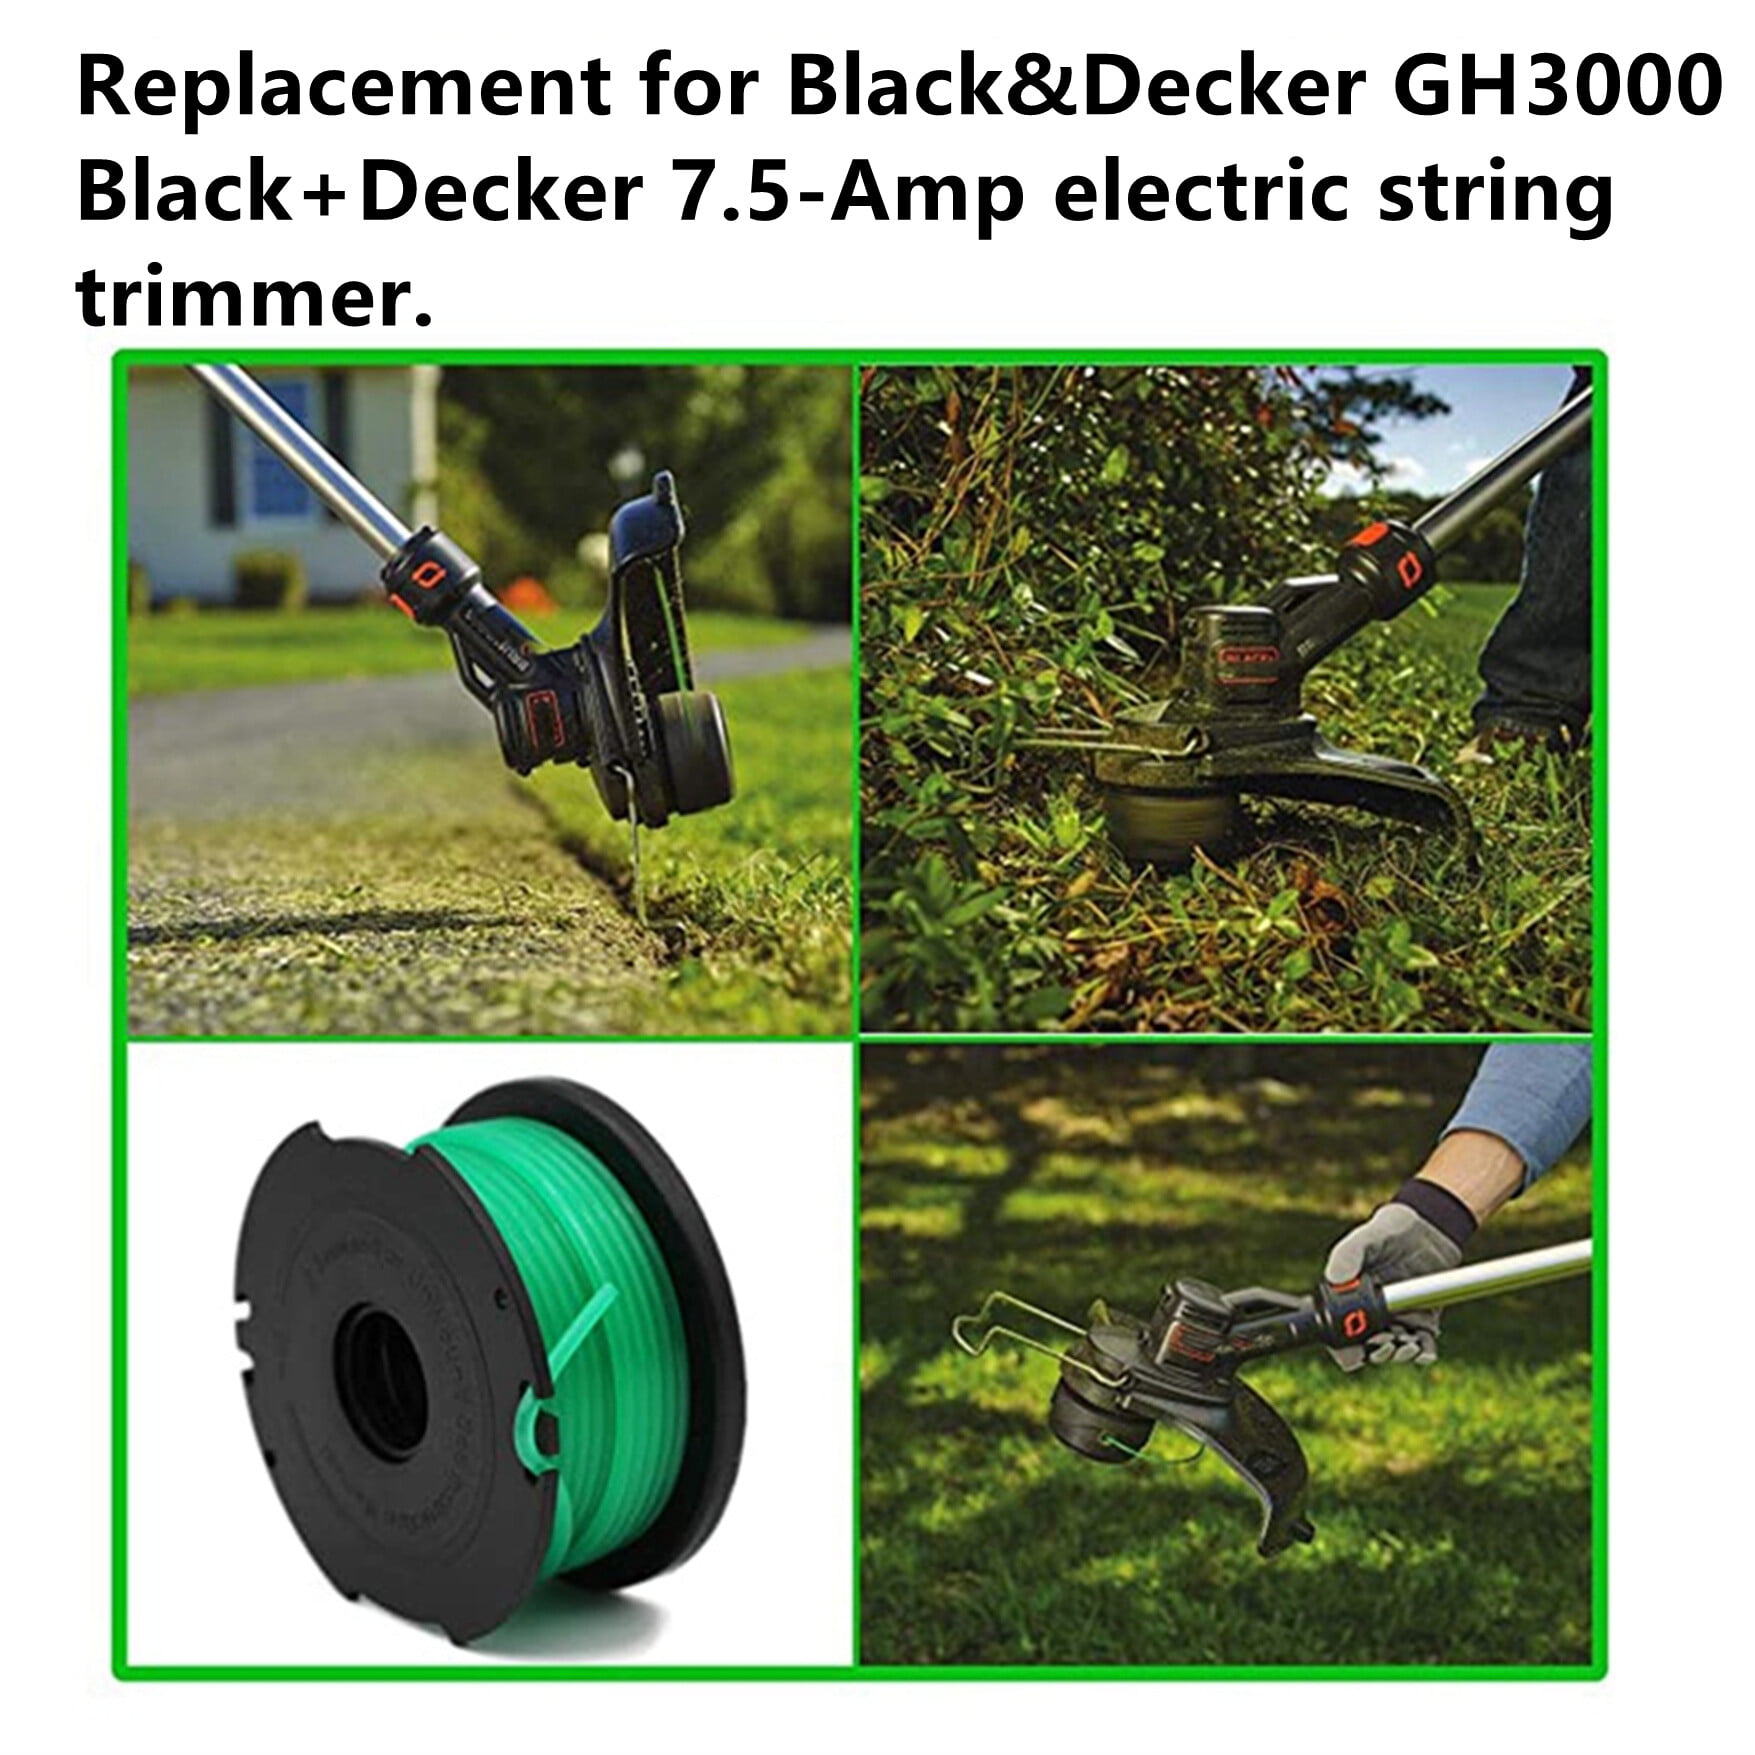 Labwork 3Pack 20ft 0.08 inch Autofeed String Trimmer Spools Green Weed Eater Lines Sf-080 Fit for Black & Decker GH3000 GH3000R LST540 LST540B Lawn